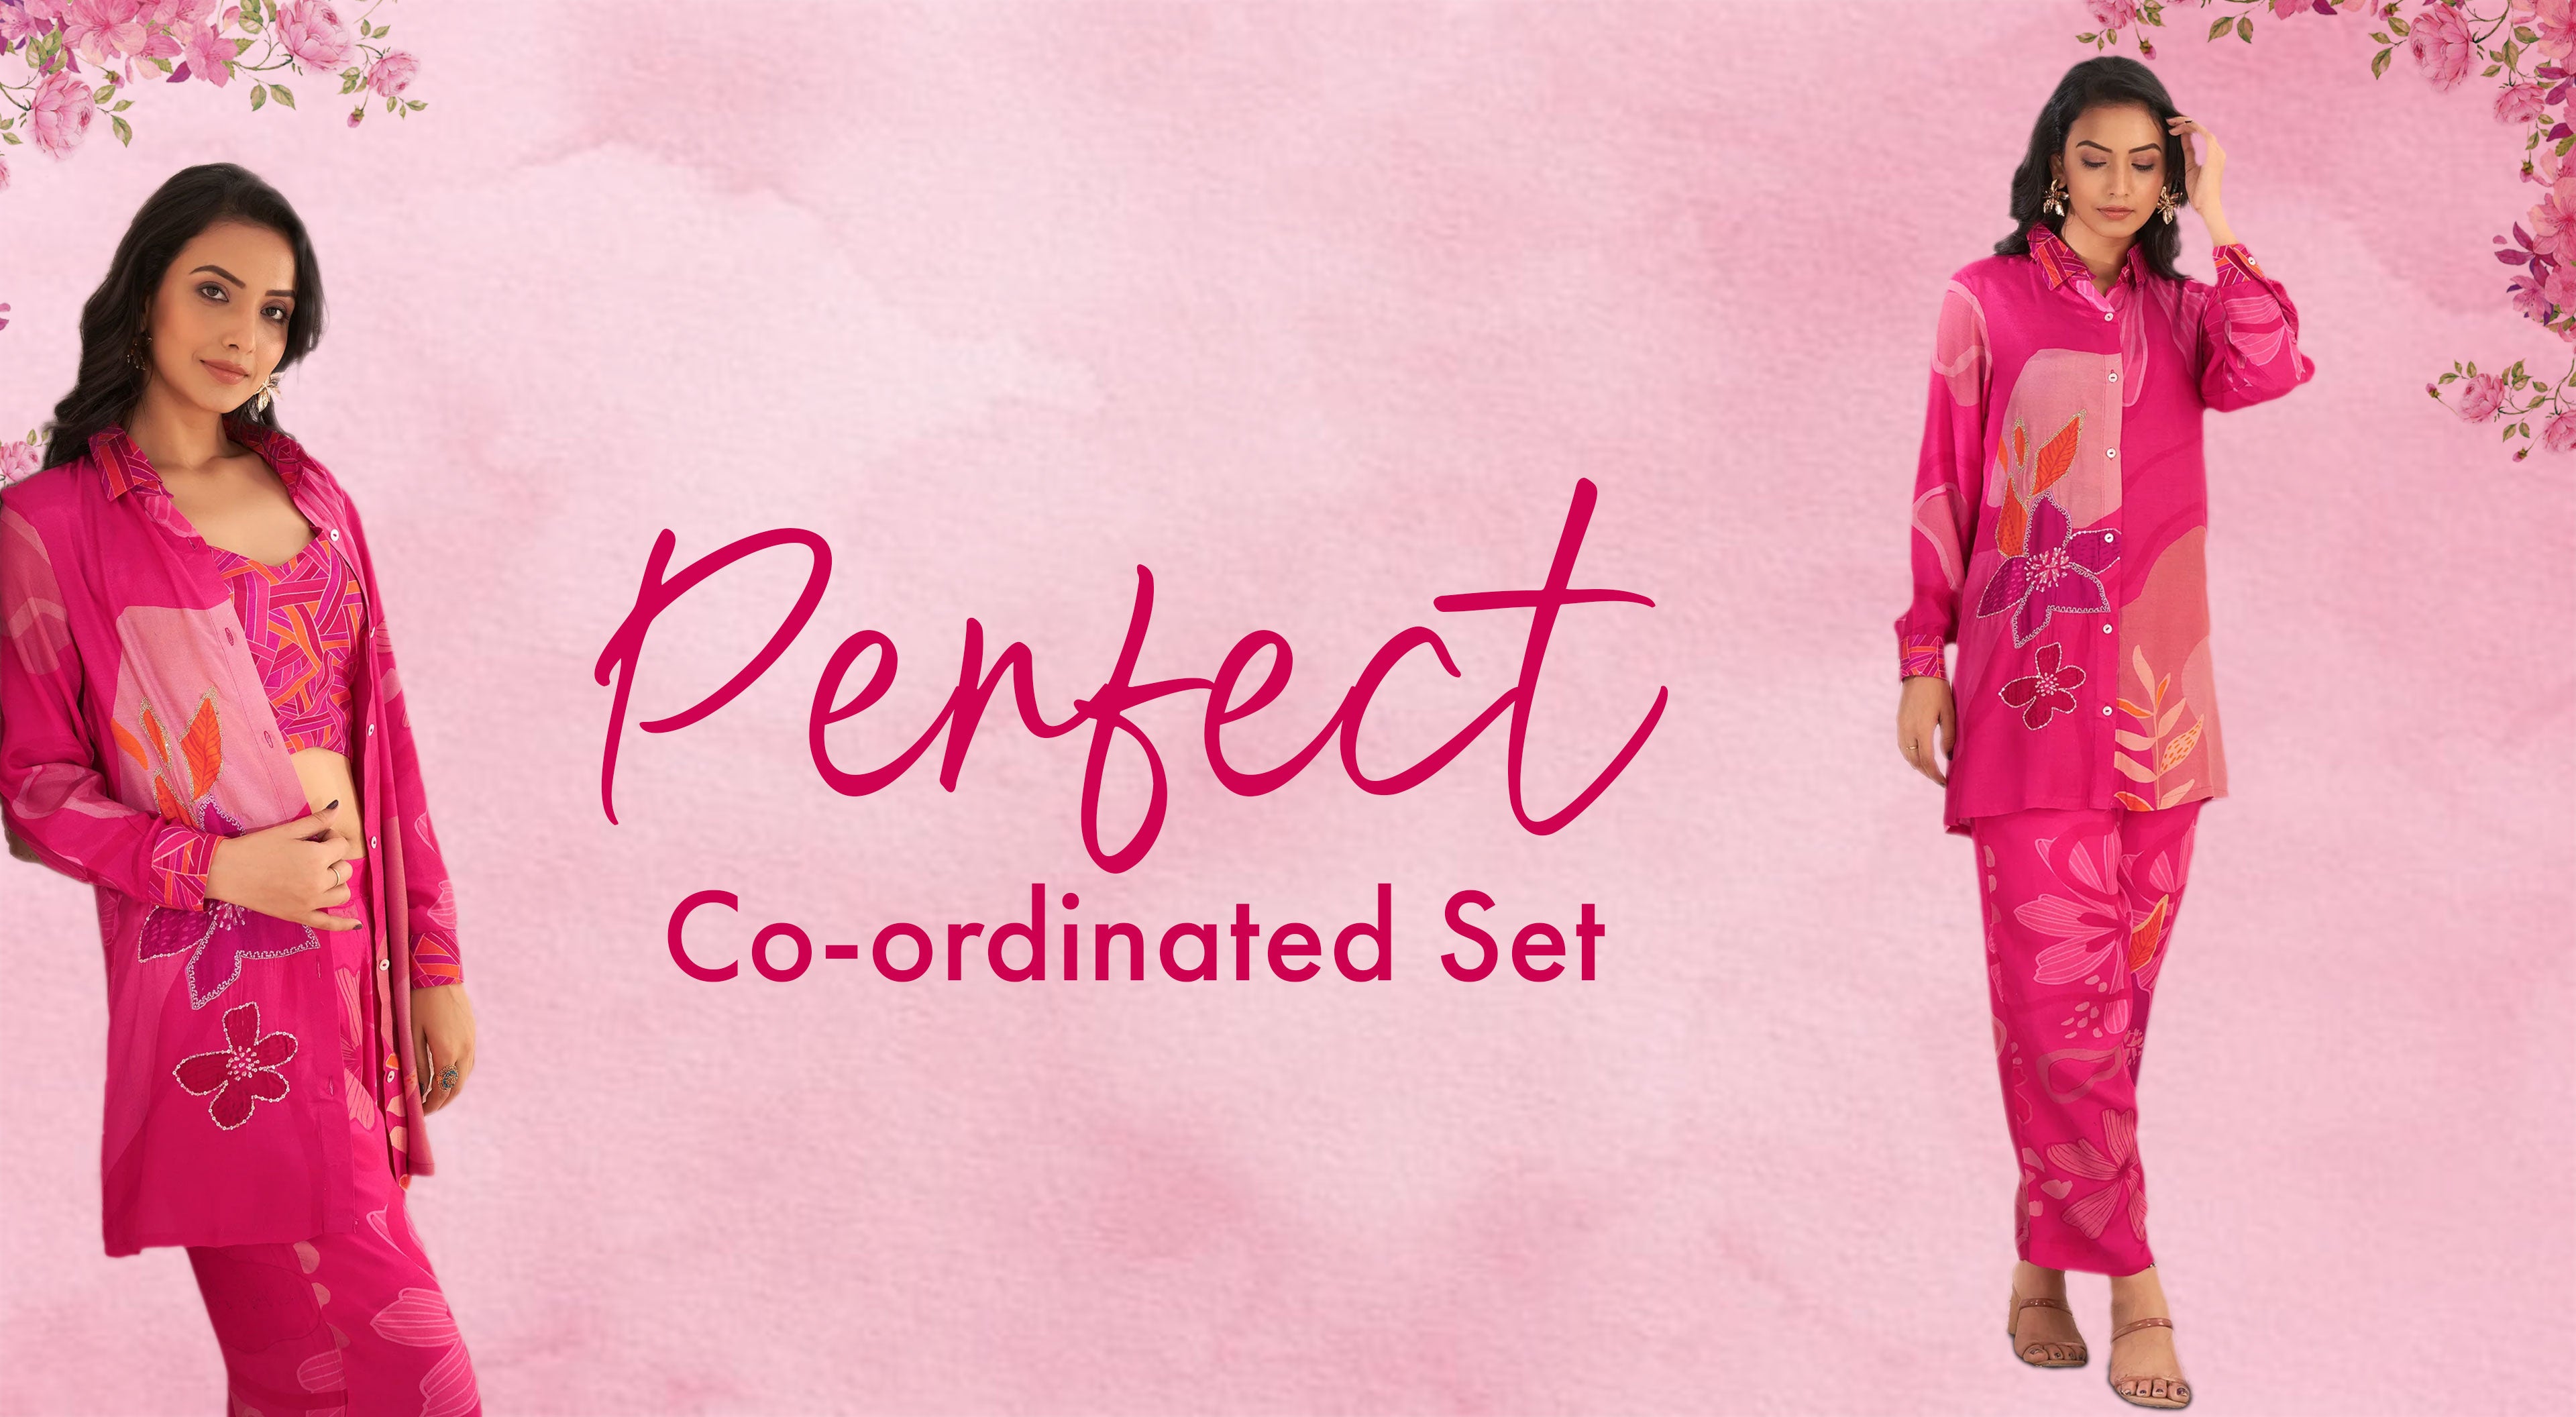 Co-ordinated Perfection: Women’s Sets for a Seamless Look - Kaftanize